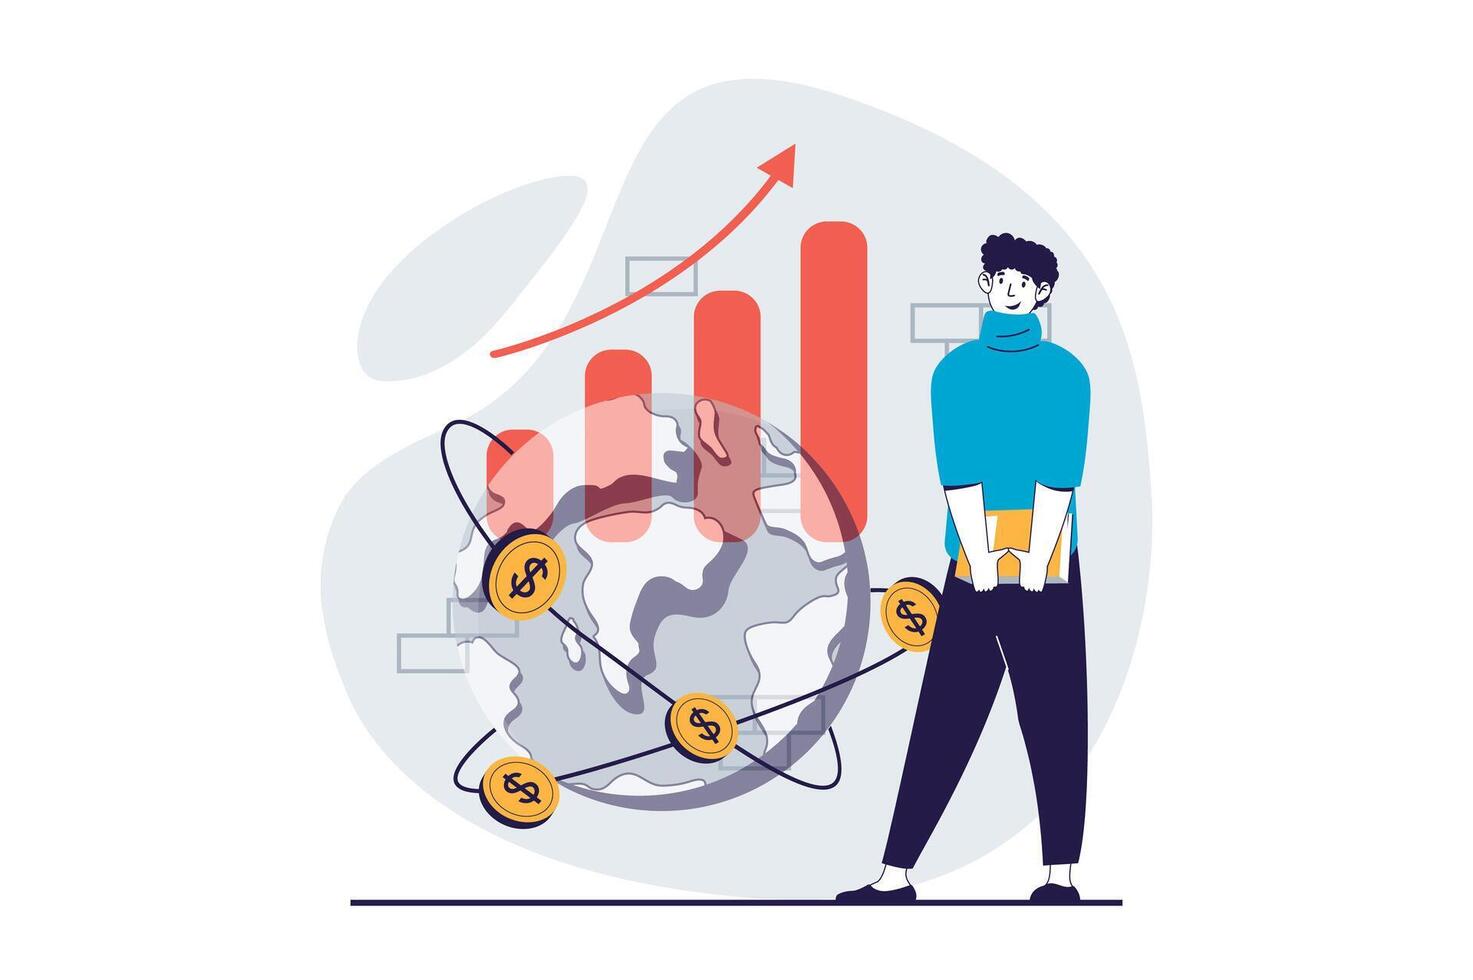 Global economic concept with people scene in flat design for web. Man analyzing data of worldwide market, creating success business. Vector illustration for social media banner, marketing material.